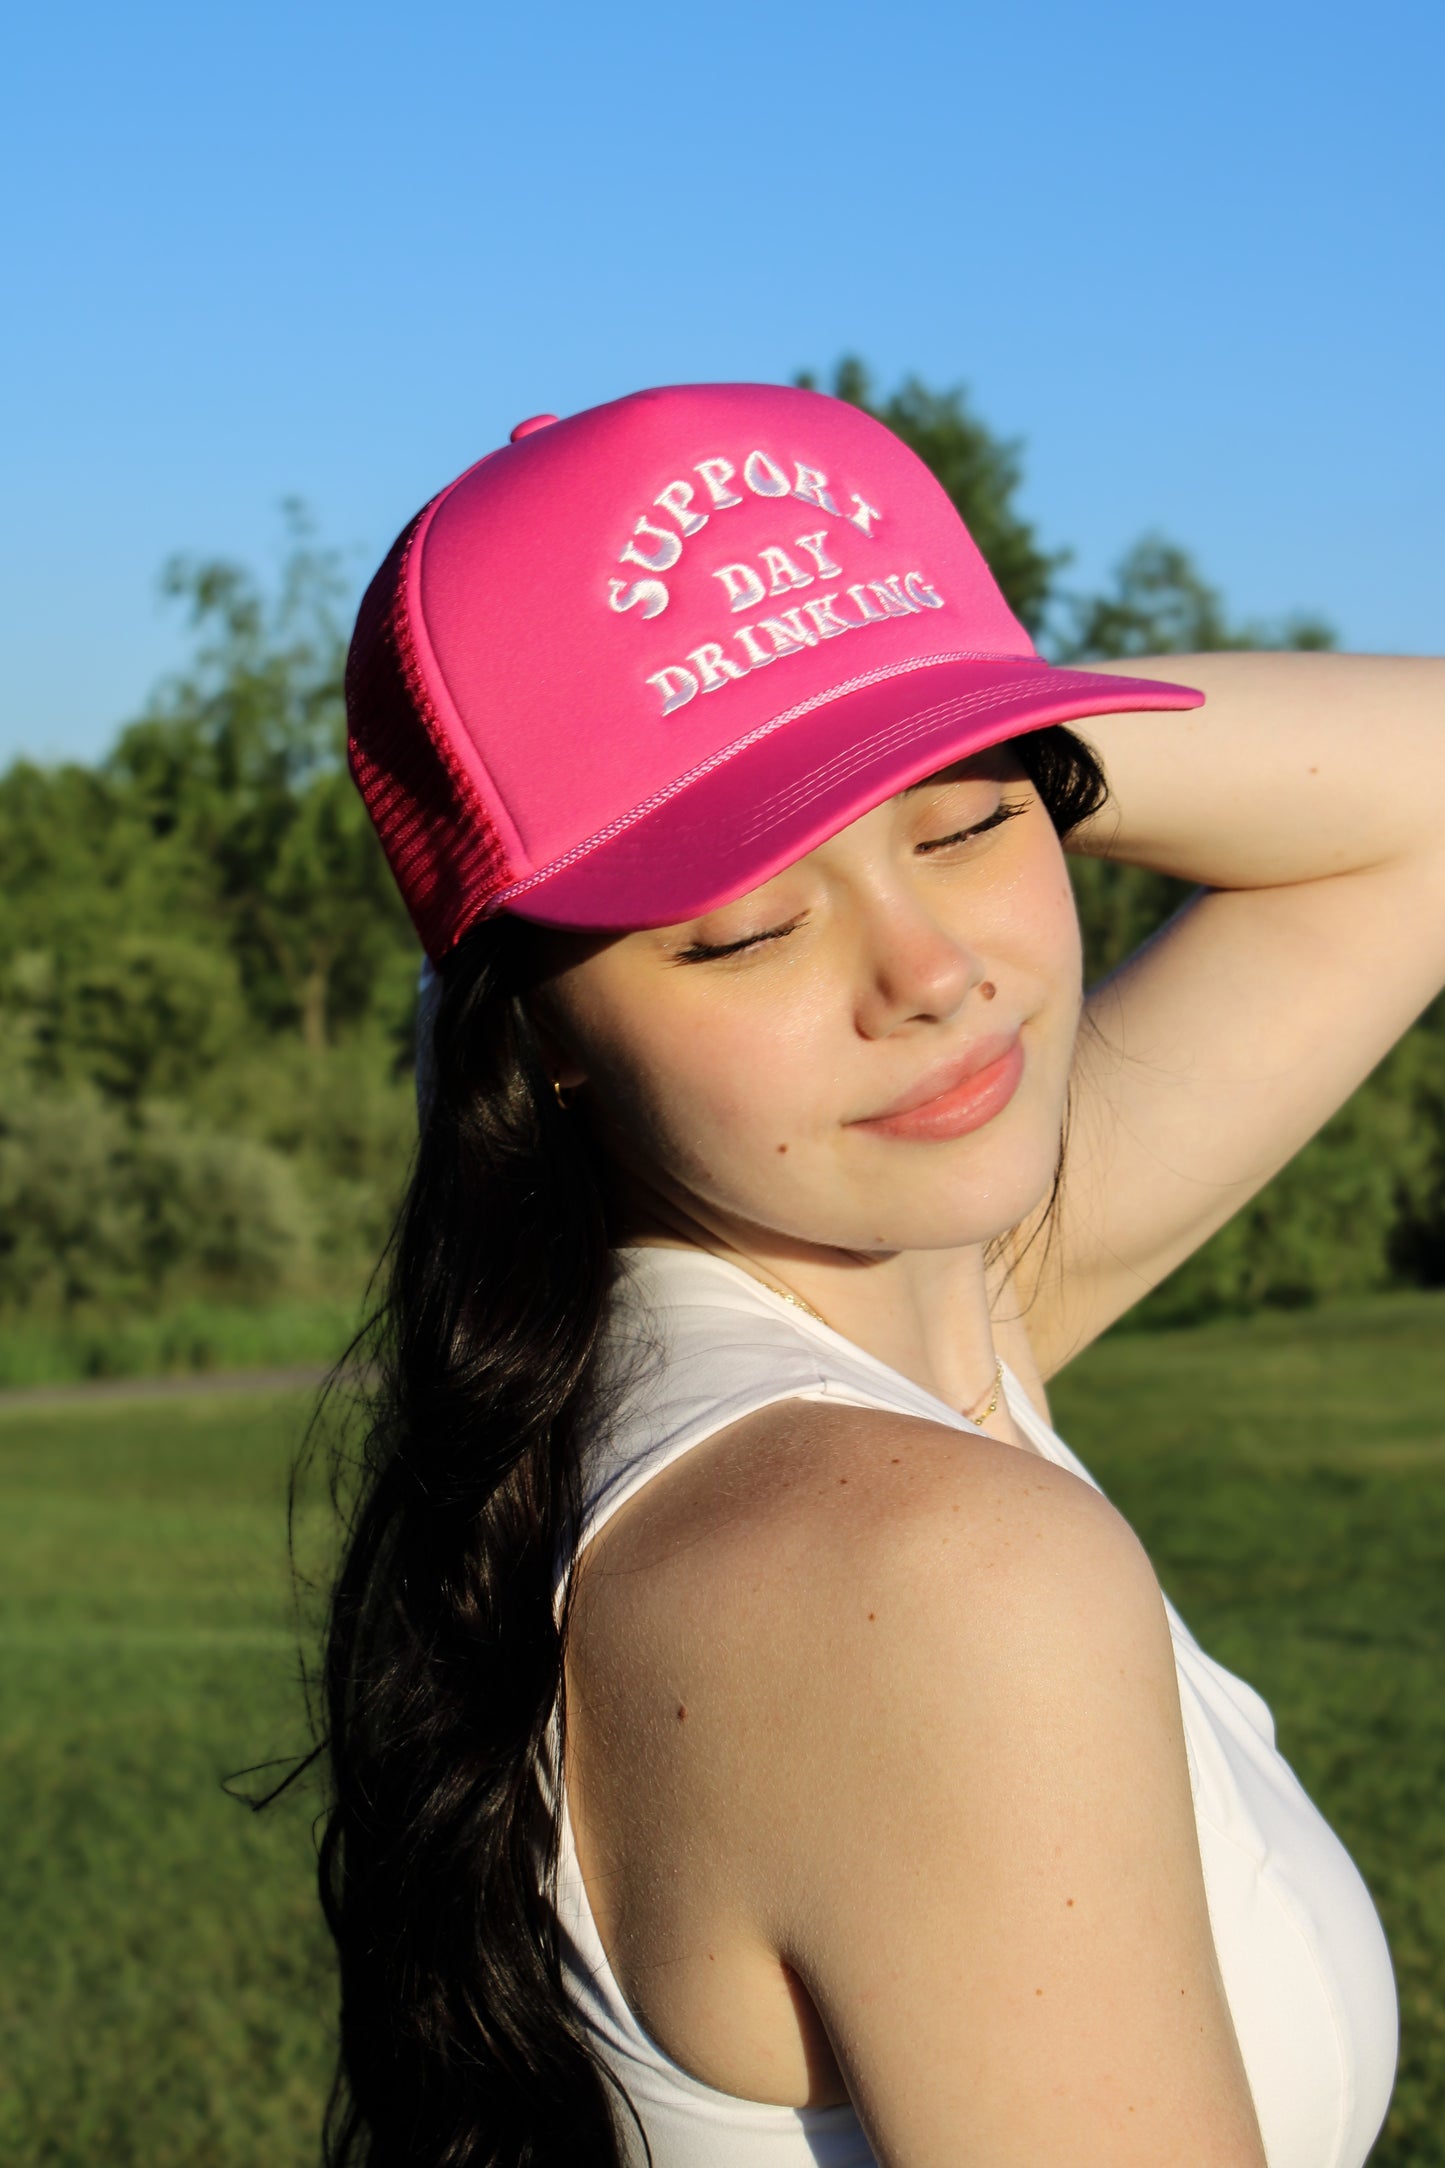 Support Day Drinking Embroidered Trucker Cap: One Size / FUCHSIA